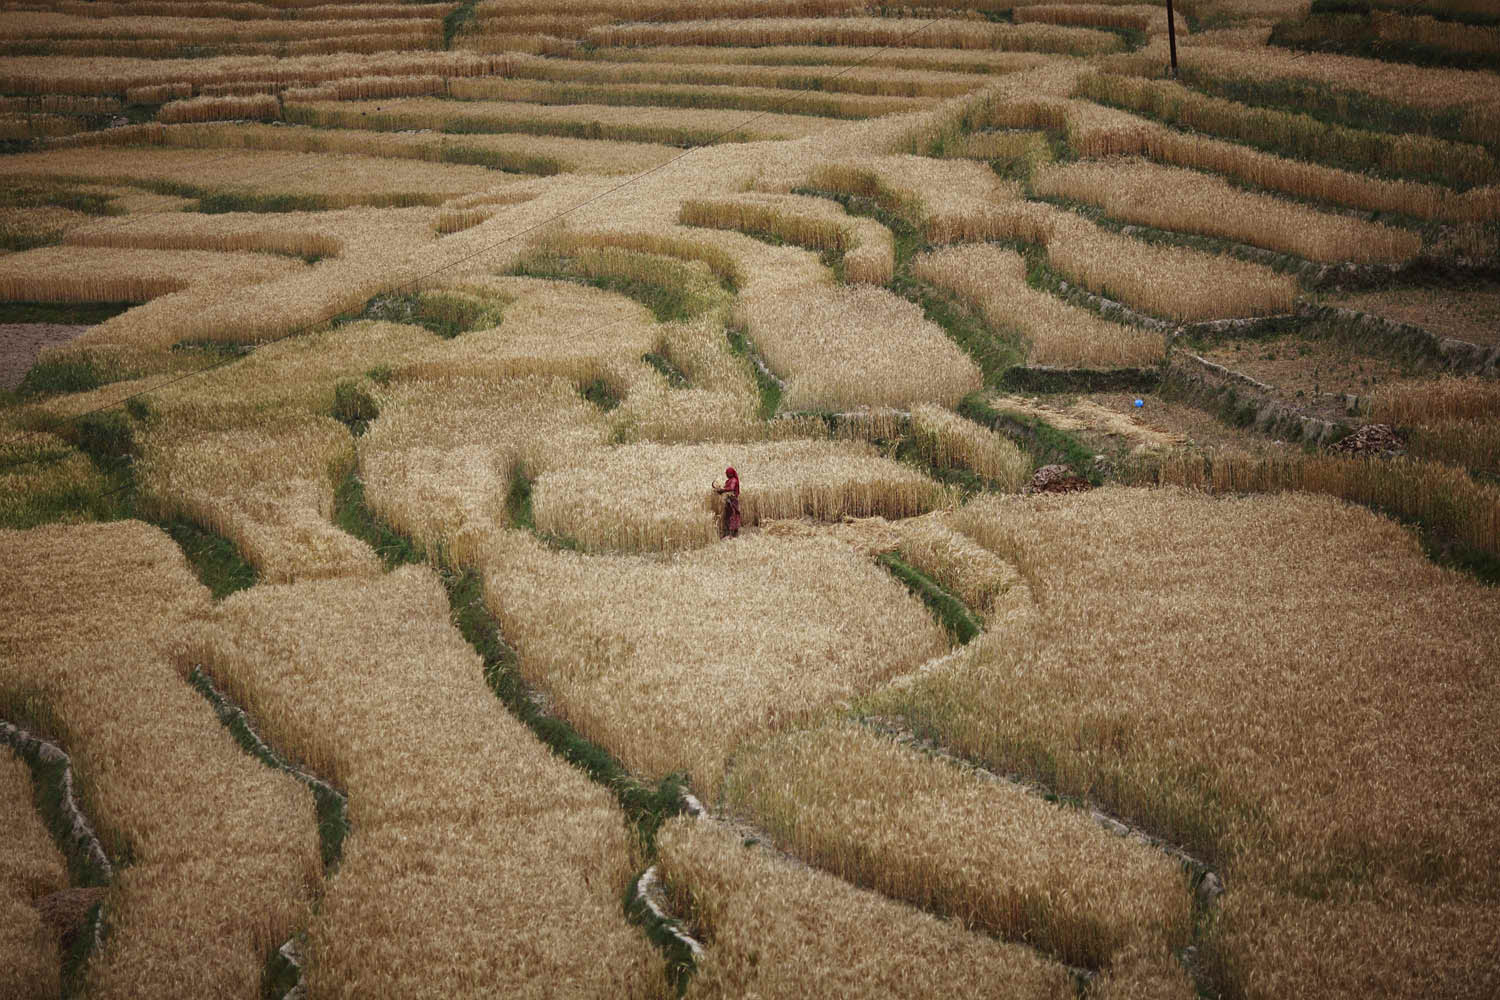 A farmer harvests wheat at the fields in Bhaktapur